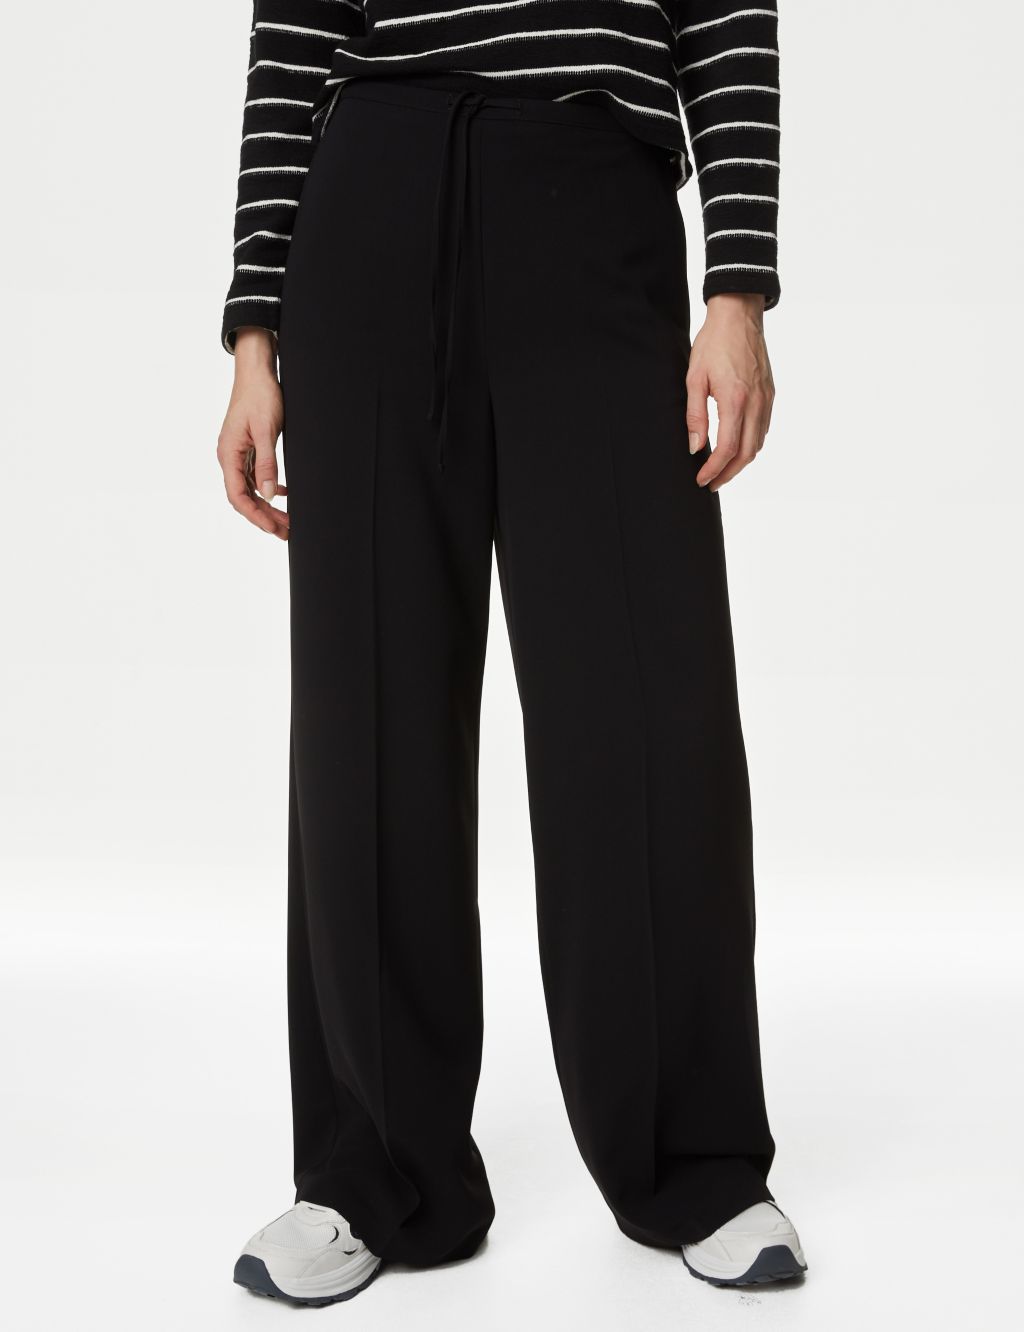 Crepe Elasticated Waist Wide Leg Trousers | M&S Collection | M&S